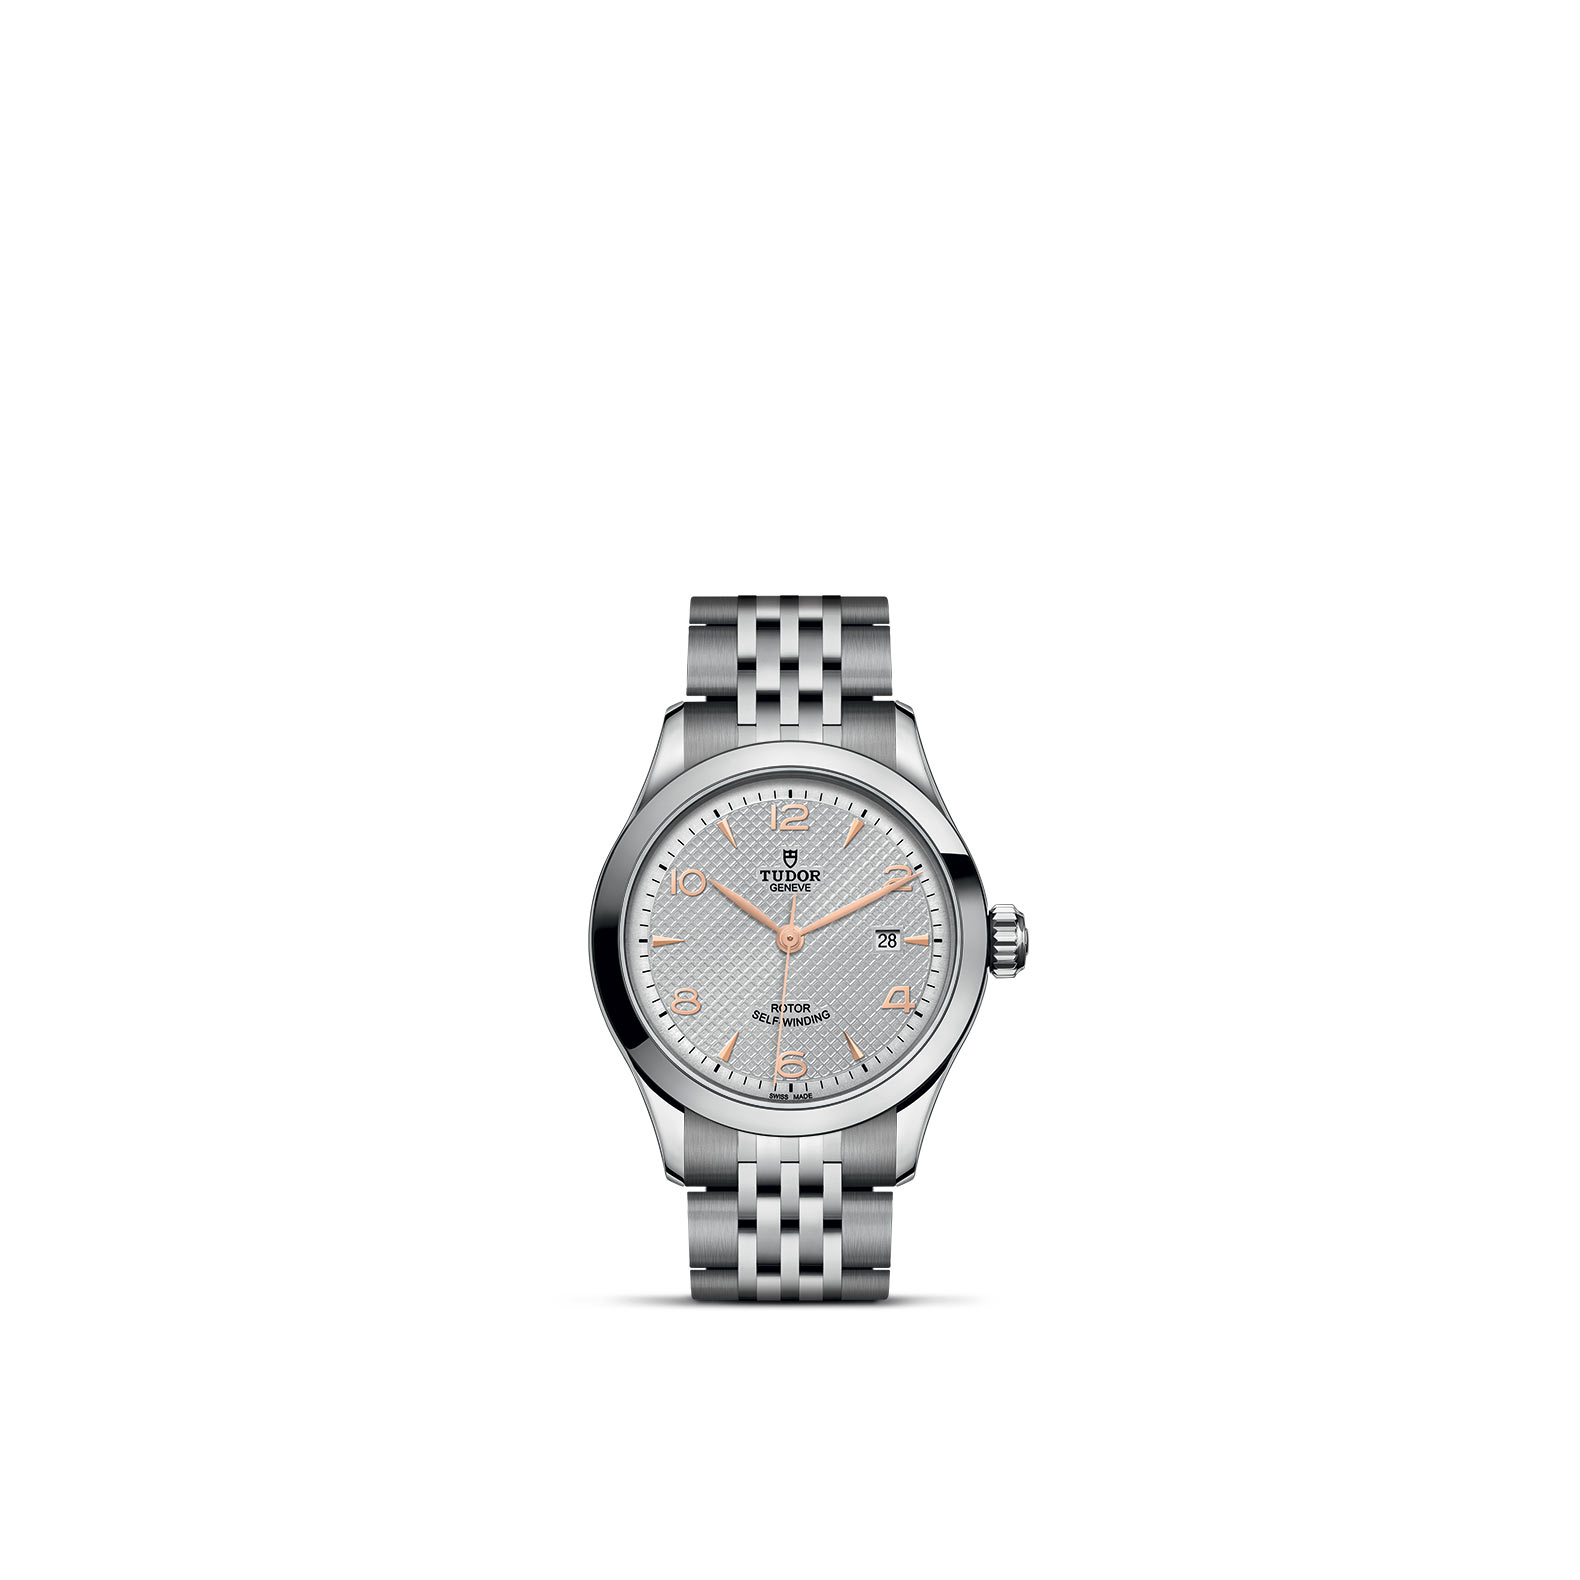 TUDOR 1926 standing upright, highlighting its classic design against a white background.